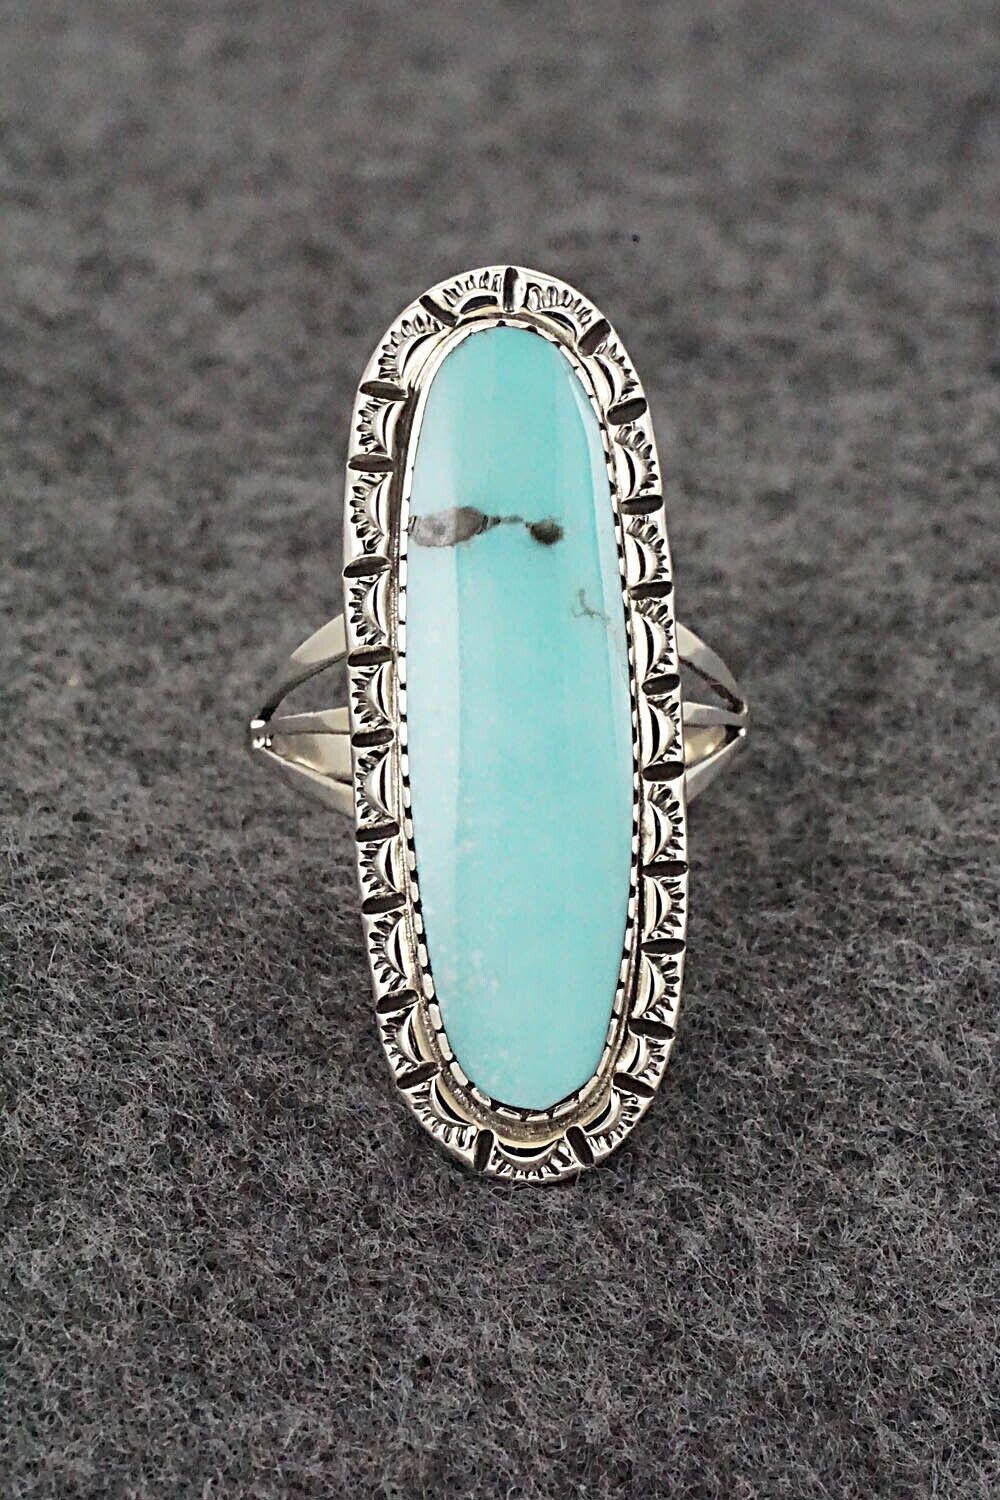 Turquoise & Sterling Silver Ring - Mike Smith - Size 9